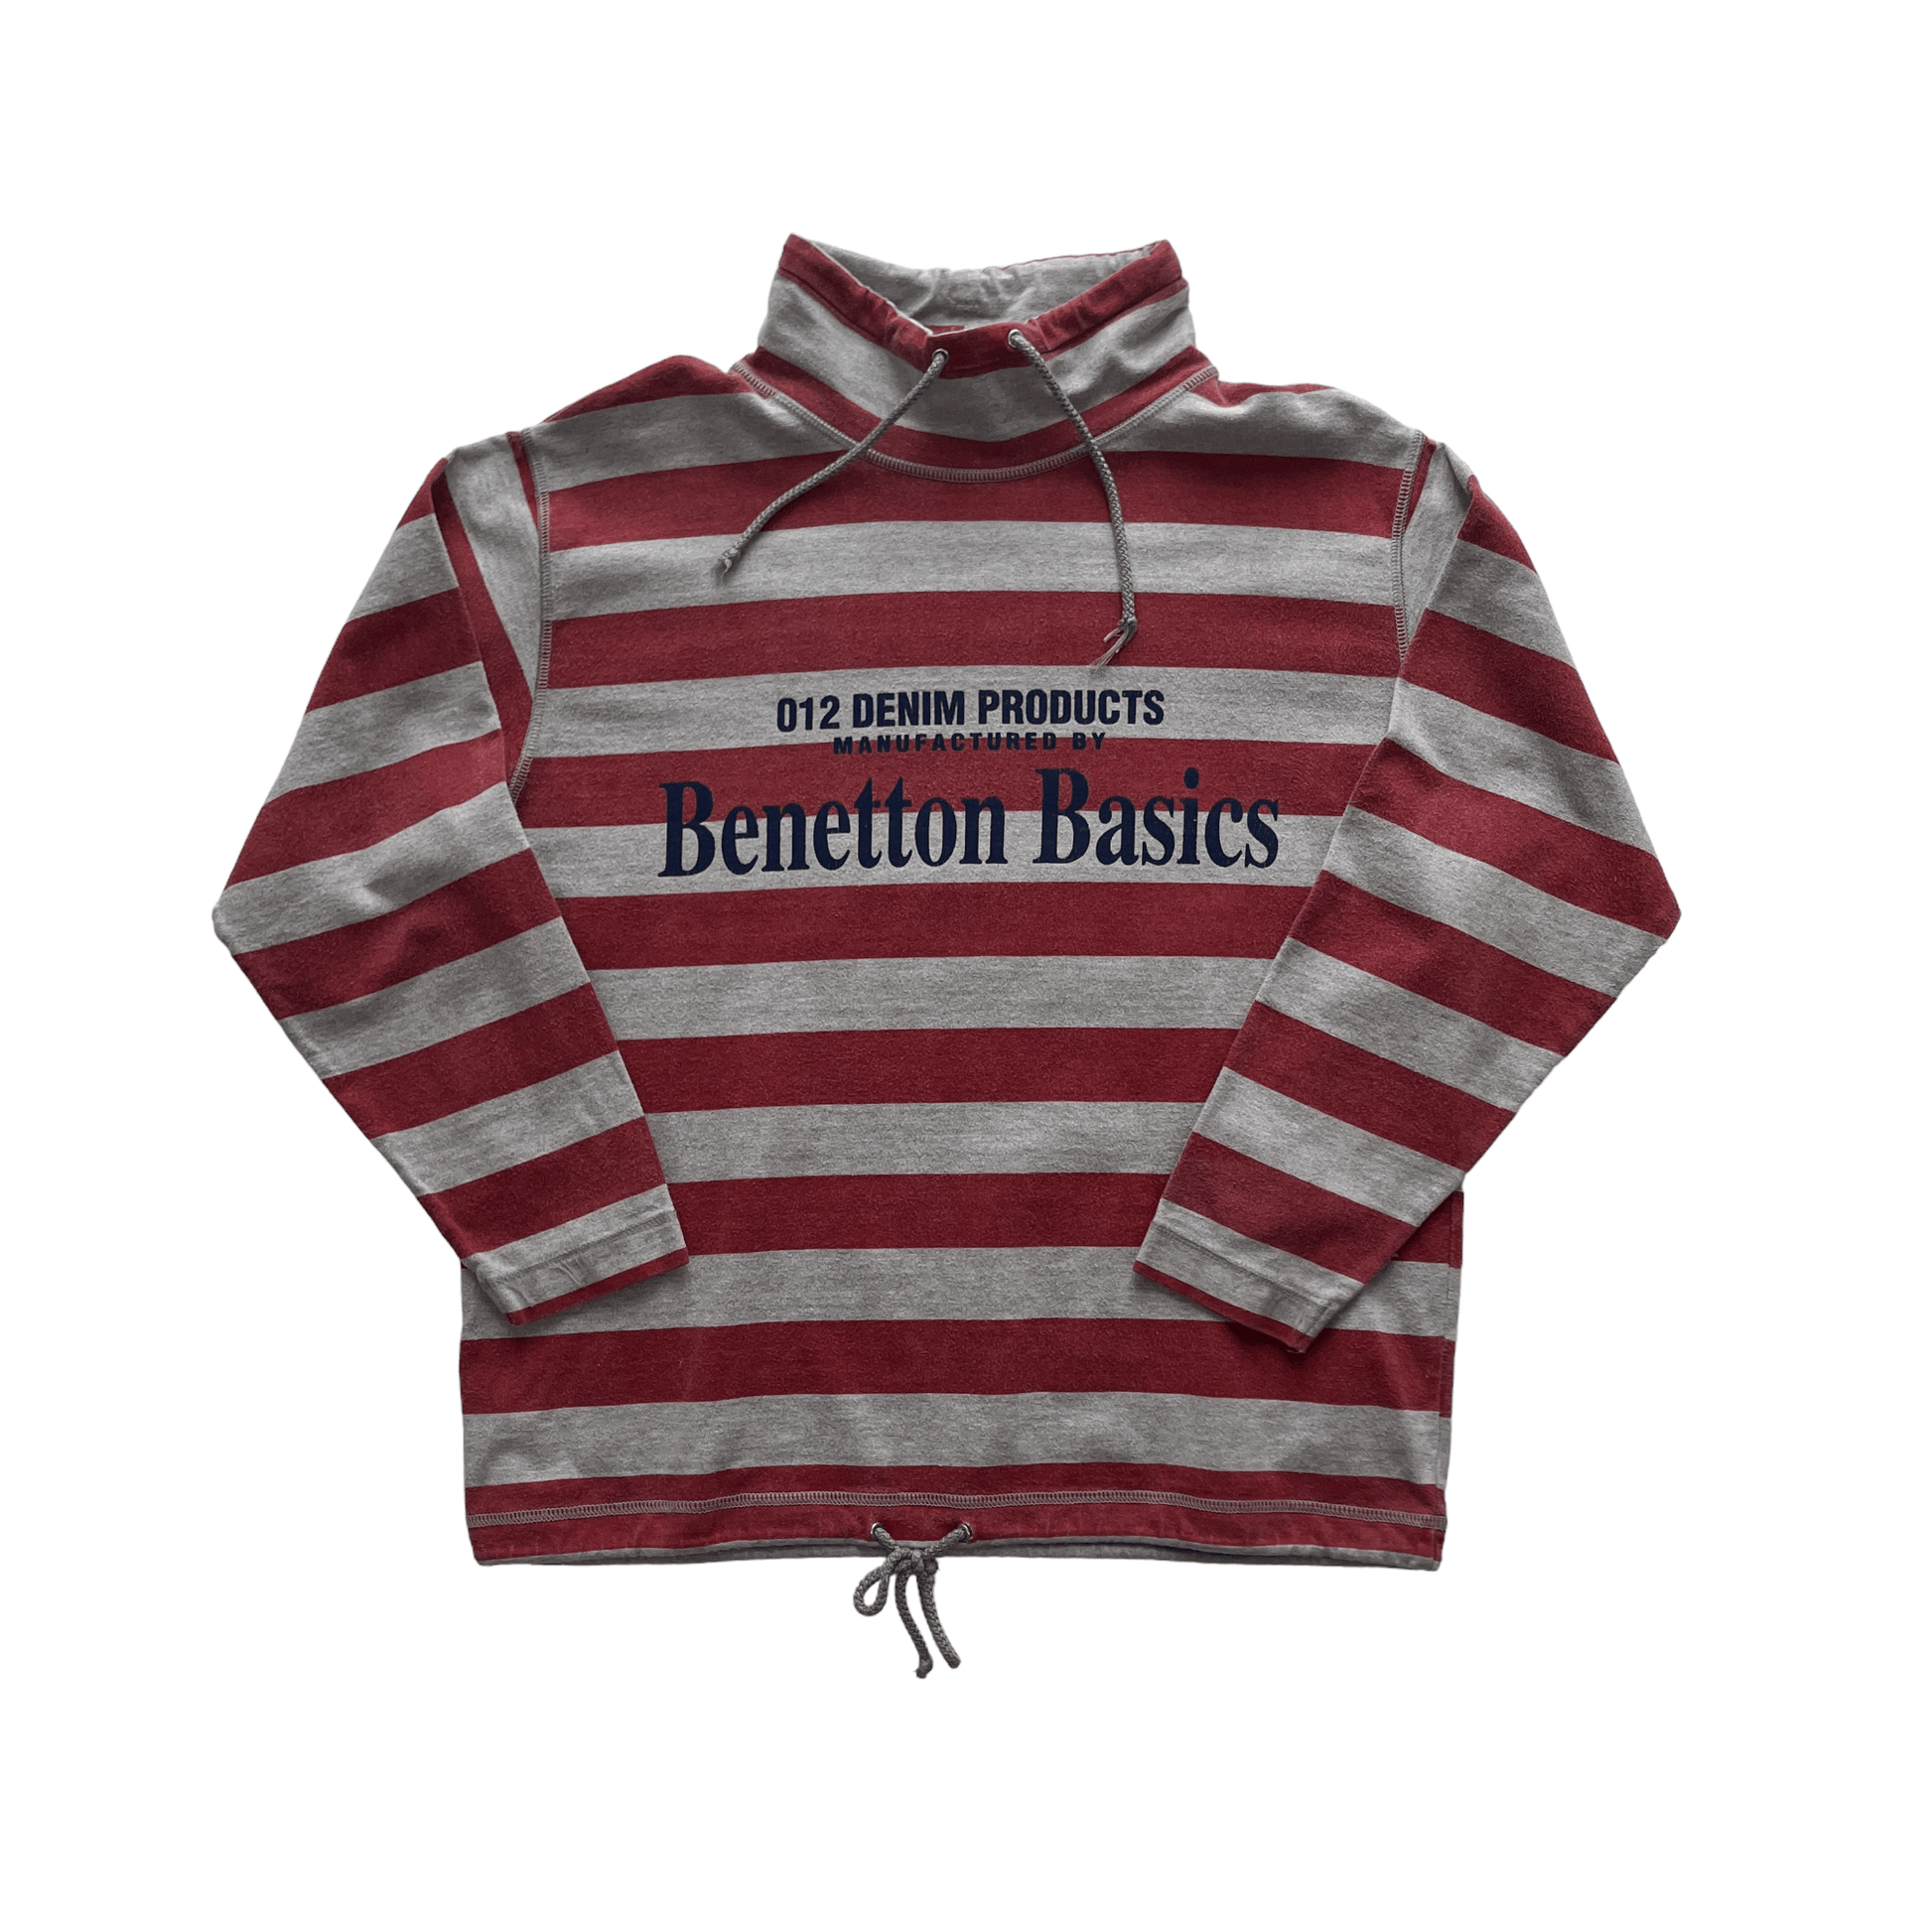 Vintage 90s Grey + Red Striped Benetton Mock Neck Sweatshirt - Recommended Size - Small - The Streetwear Studio